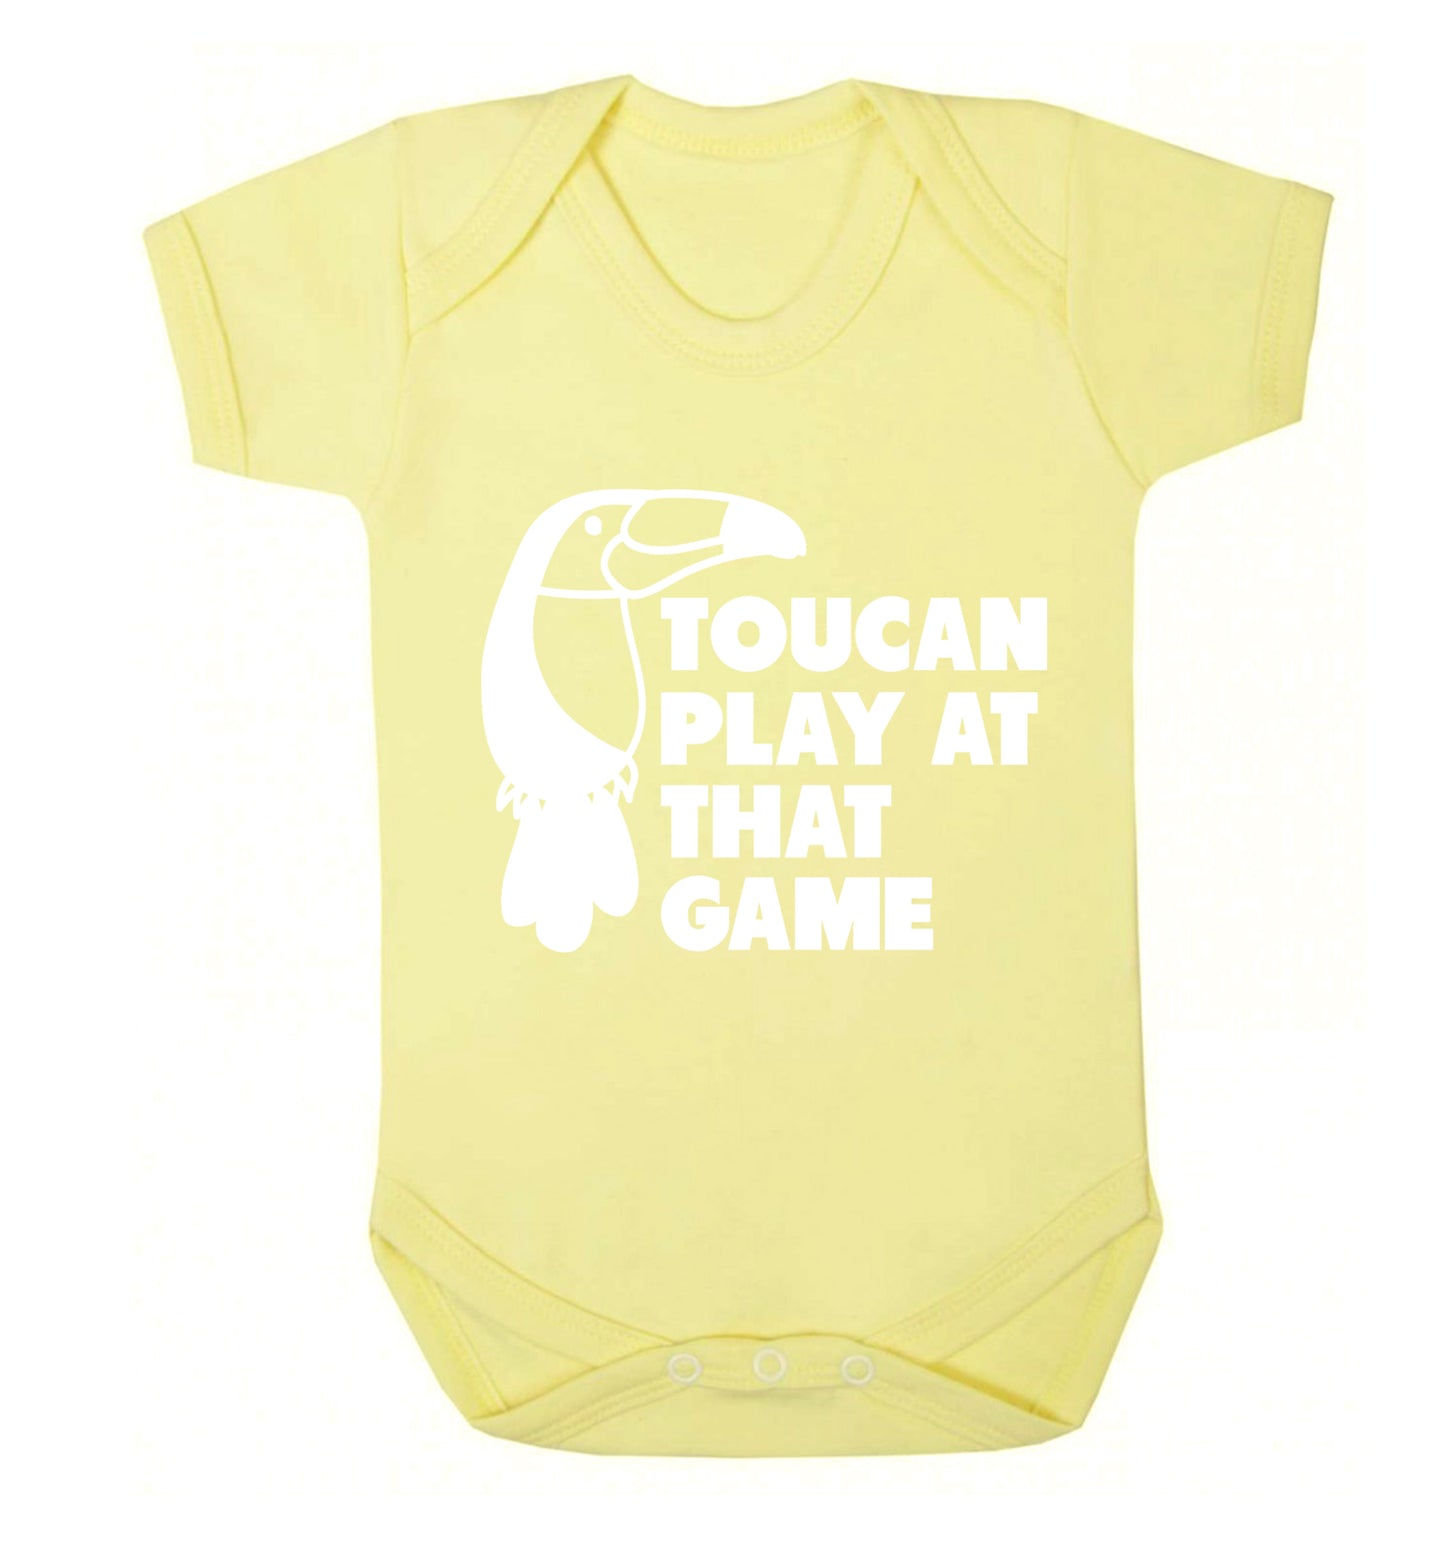 Toucan play at that game Baby Vest pale yellow 18-24 months